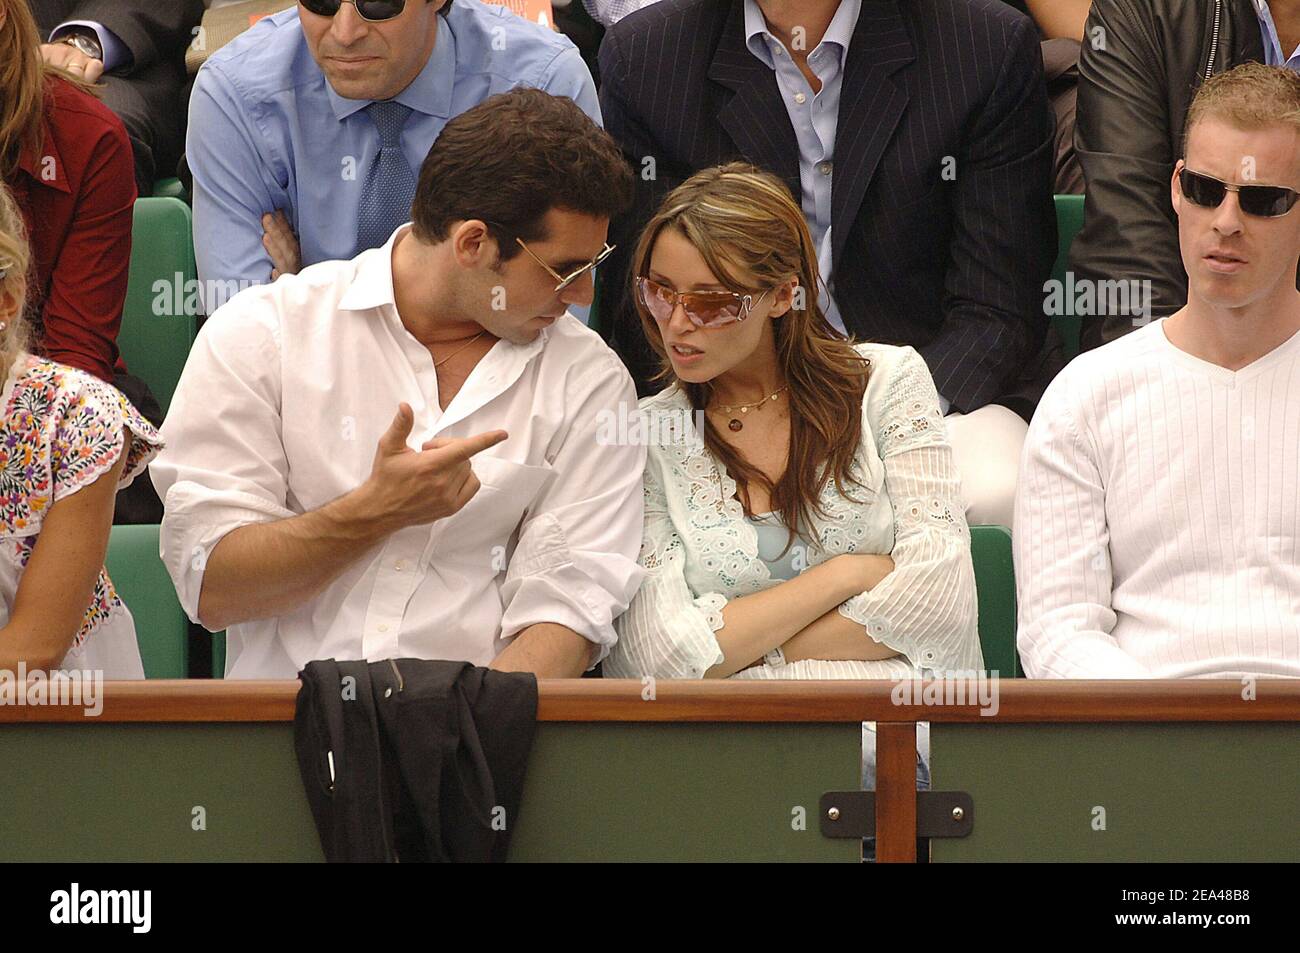 Australian singer Dannii Minogue and her boyfriend Jeremy Banster in the tribune of French tennis Open at Roland Garros in Paris, France on June 1, 2005. Photo by Gorassini-Zabulon/ABACA Stock Photo